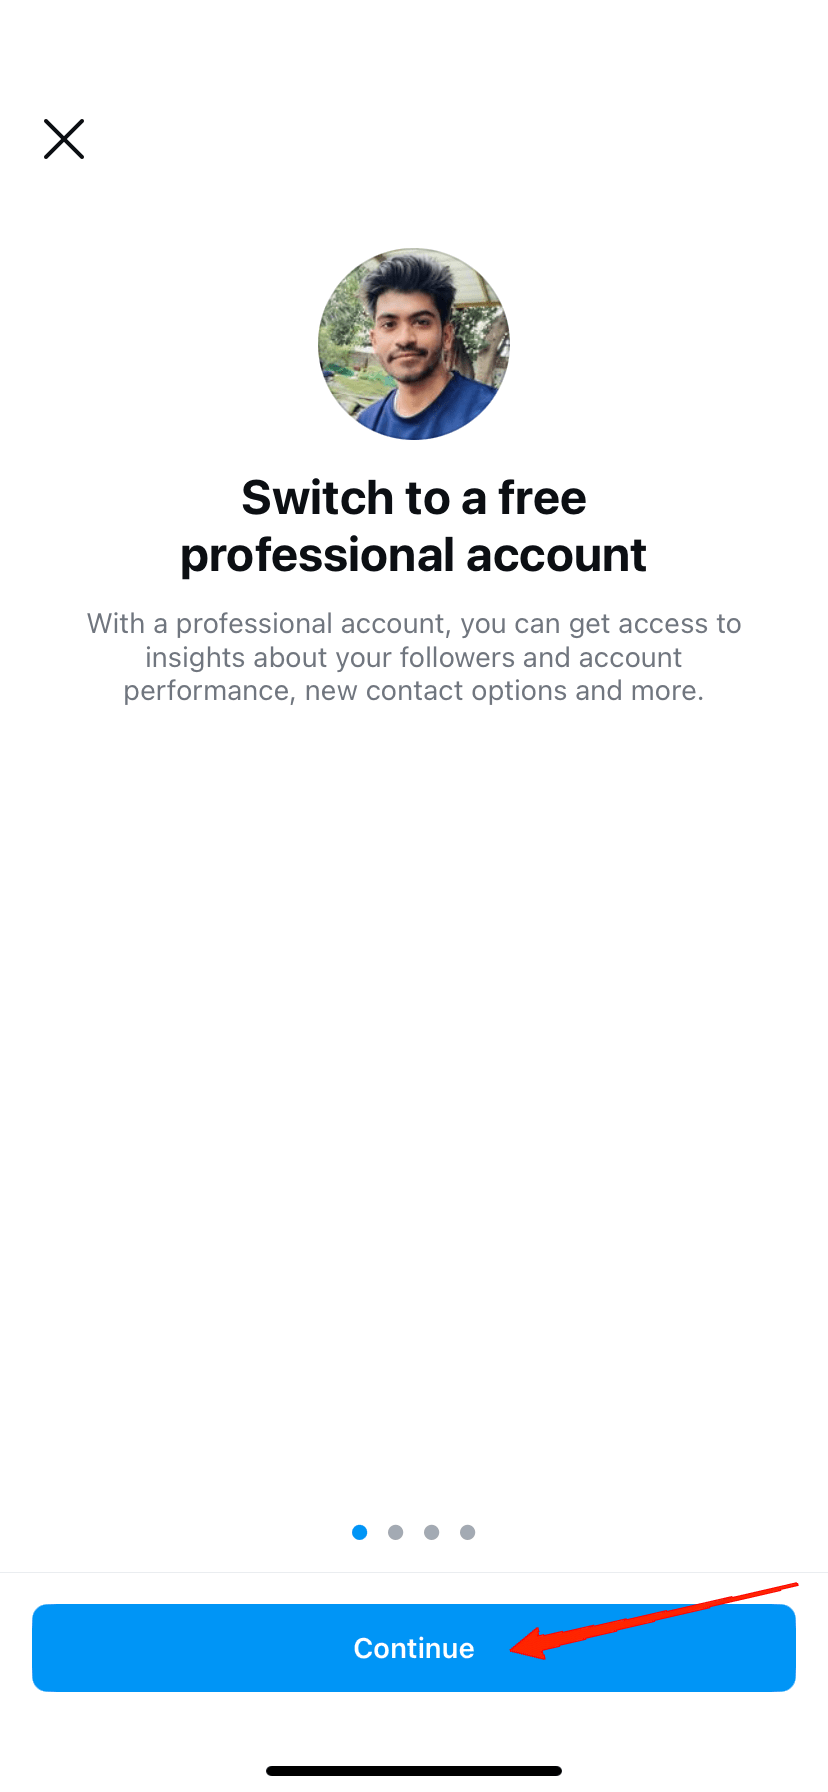 Tap on Switch on Professional Account.